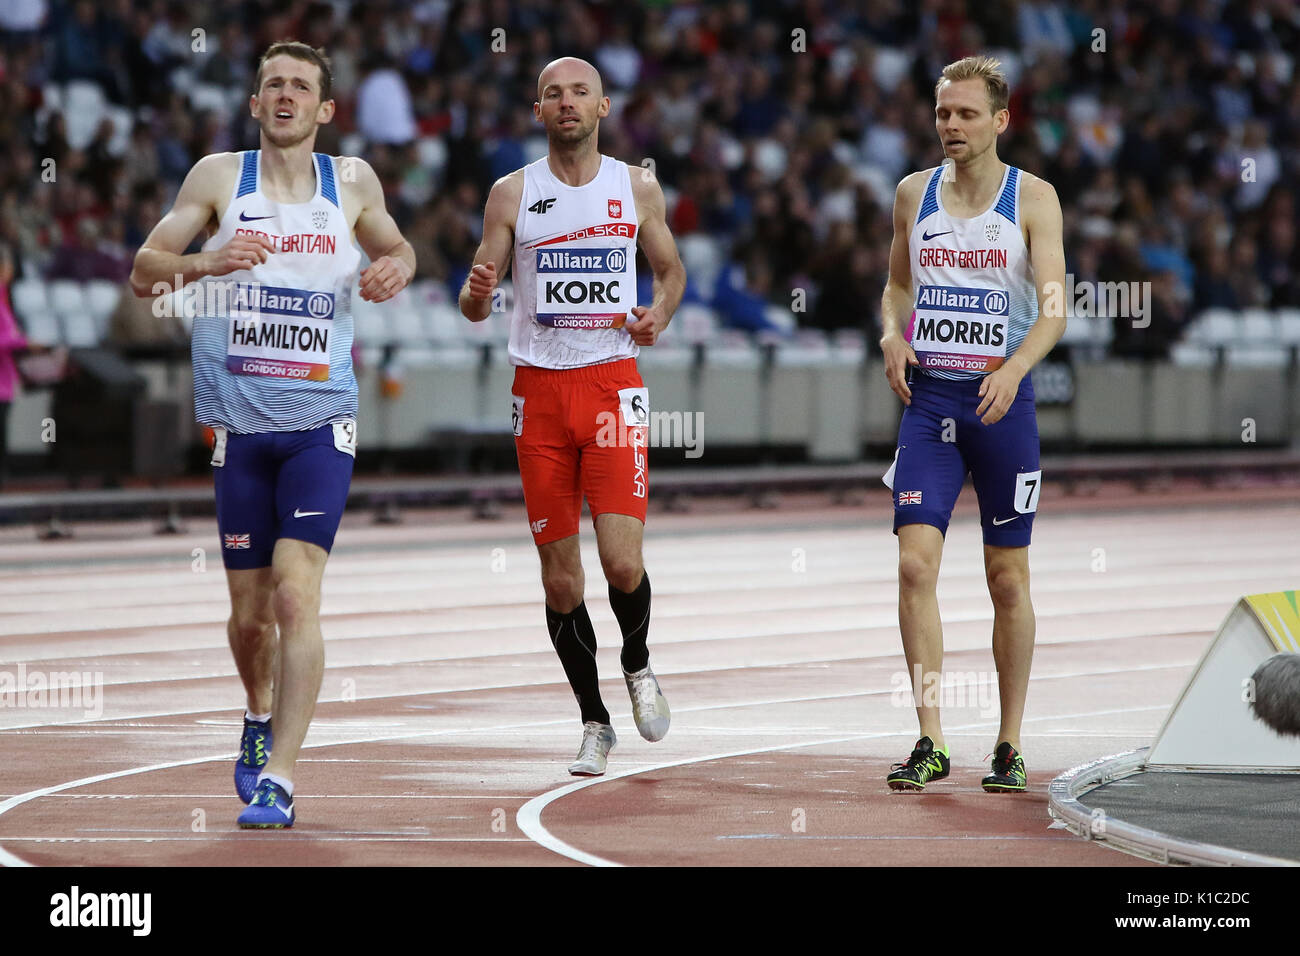 Rafal KORC of Poland in the Men's 800 m T20 Final at the World Para Championships in London 2017 Stock Photo